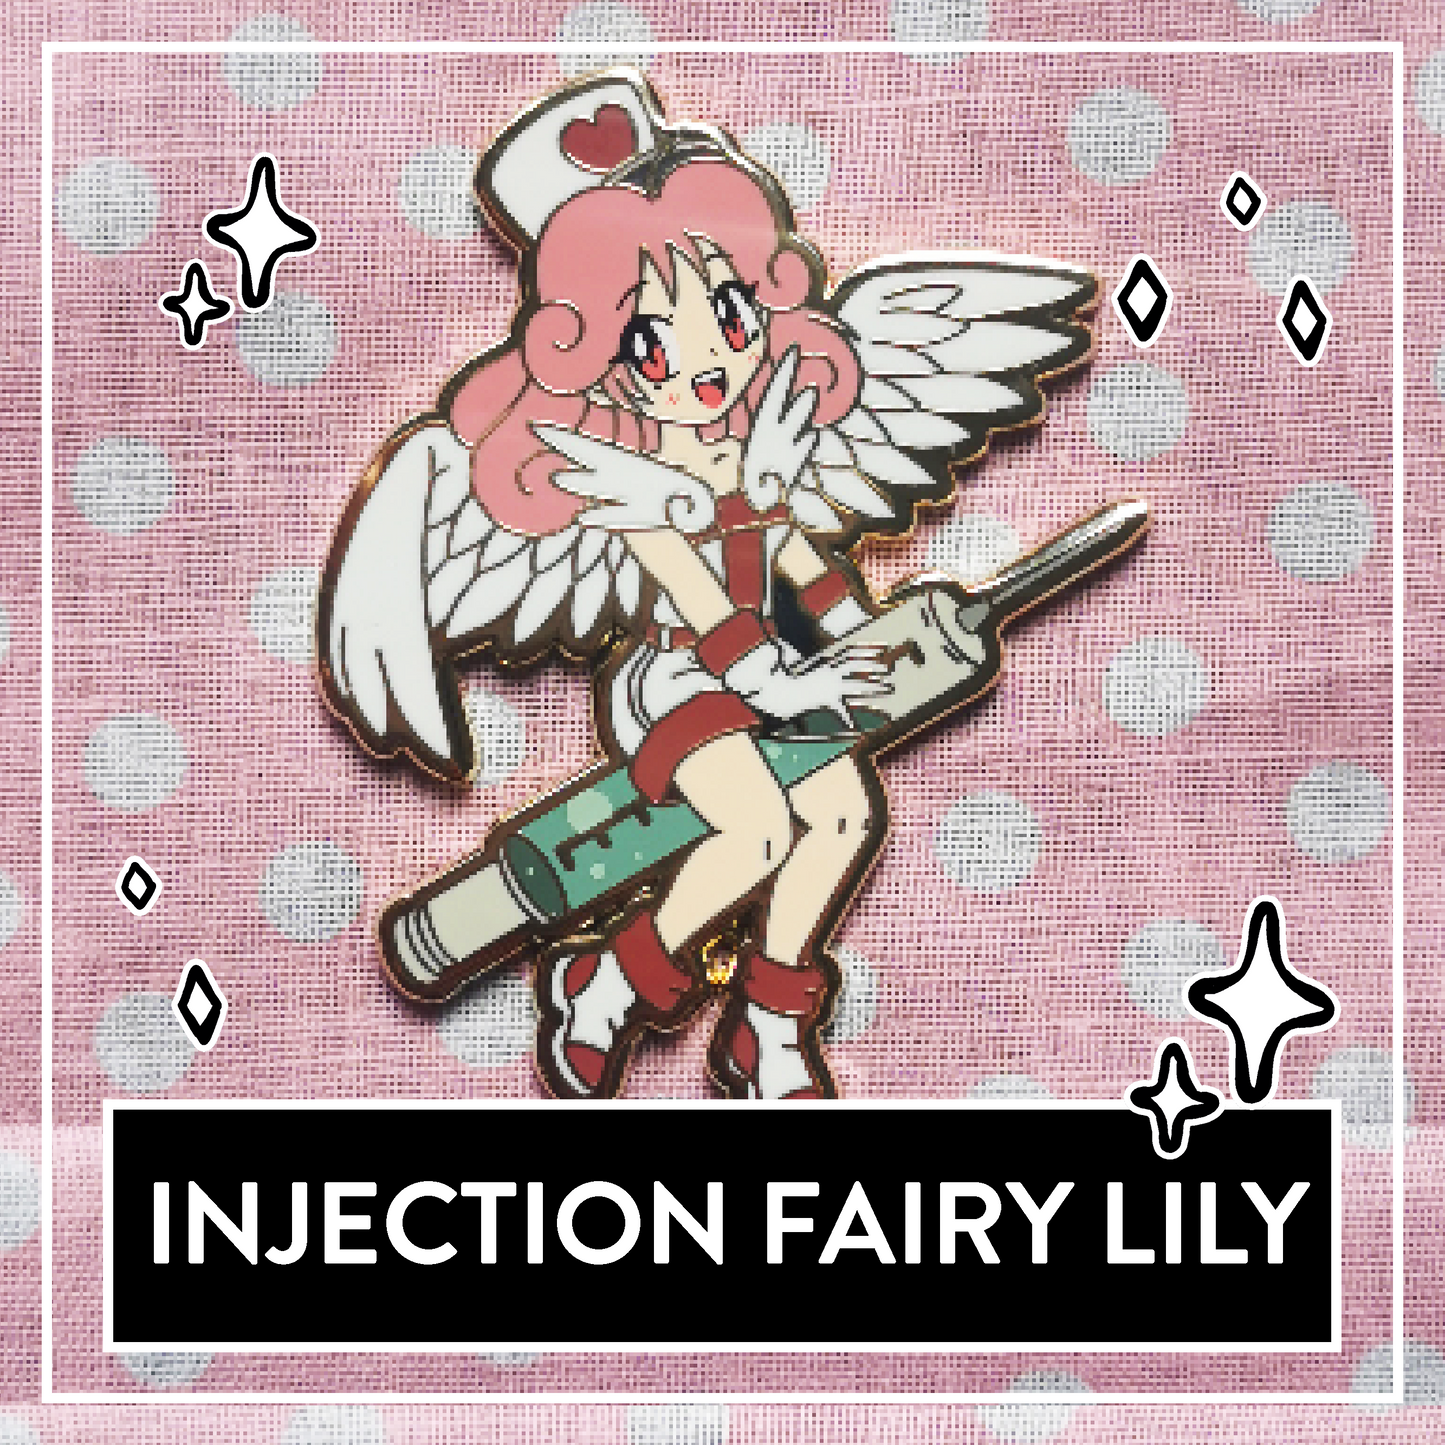 Yu-Gi-Oh! Injection Fairy Lily Enamel Pin